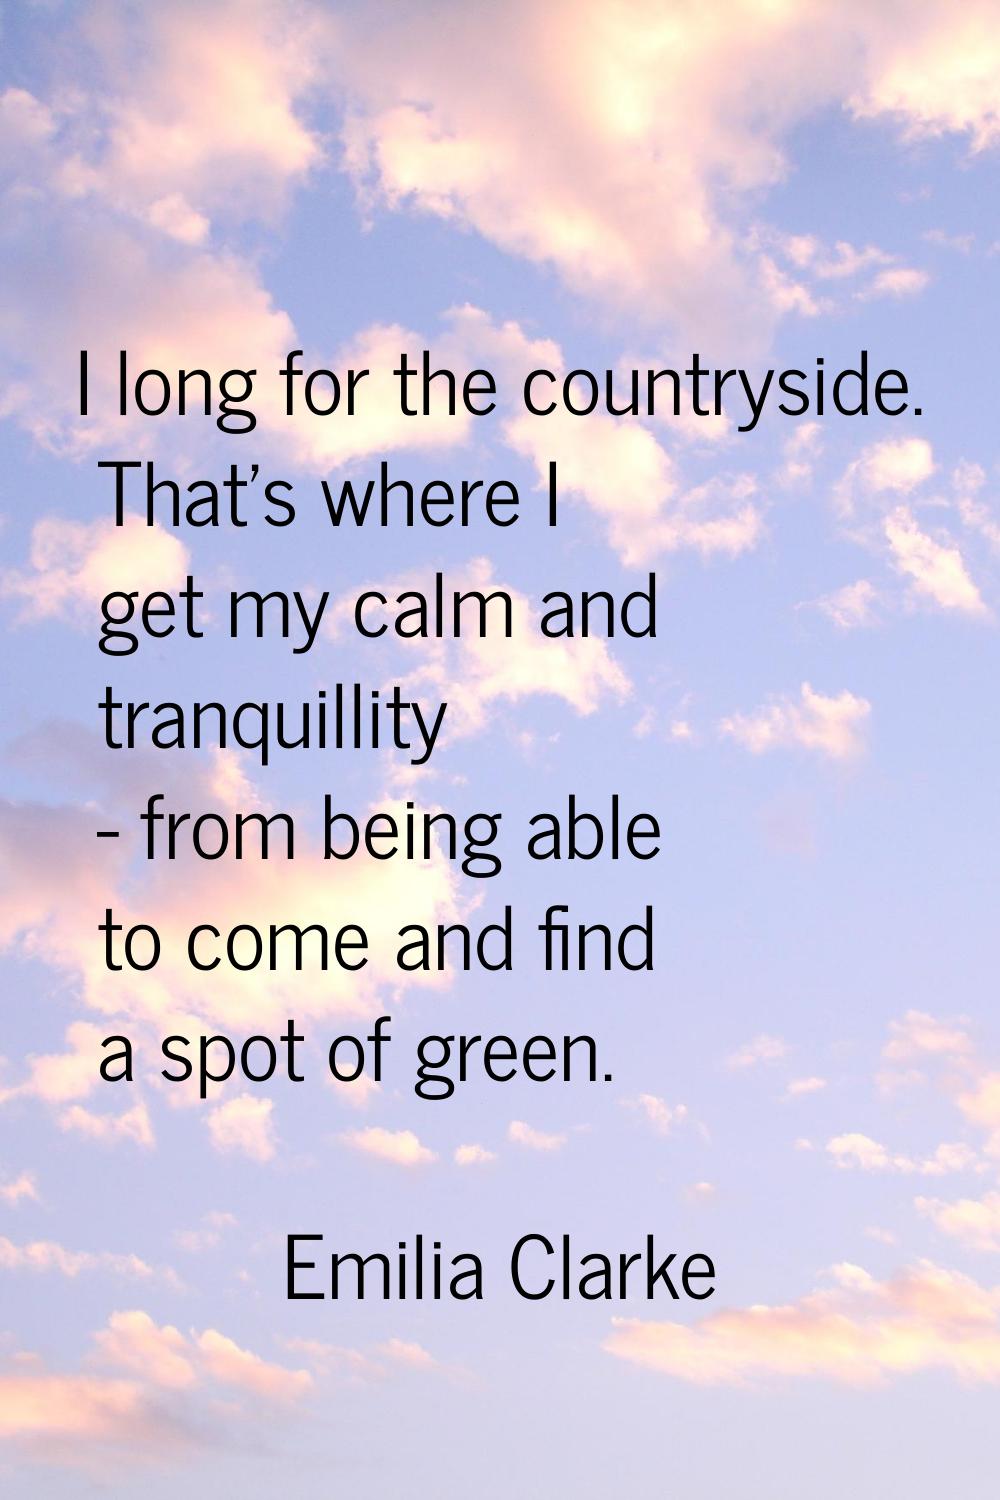 I long for the countryside. That's where I get my calm and tranquillity - from being able to come a